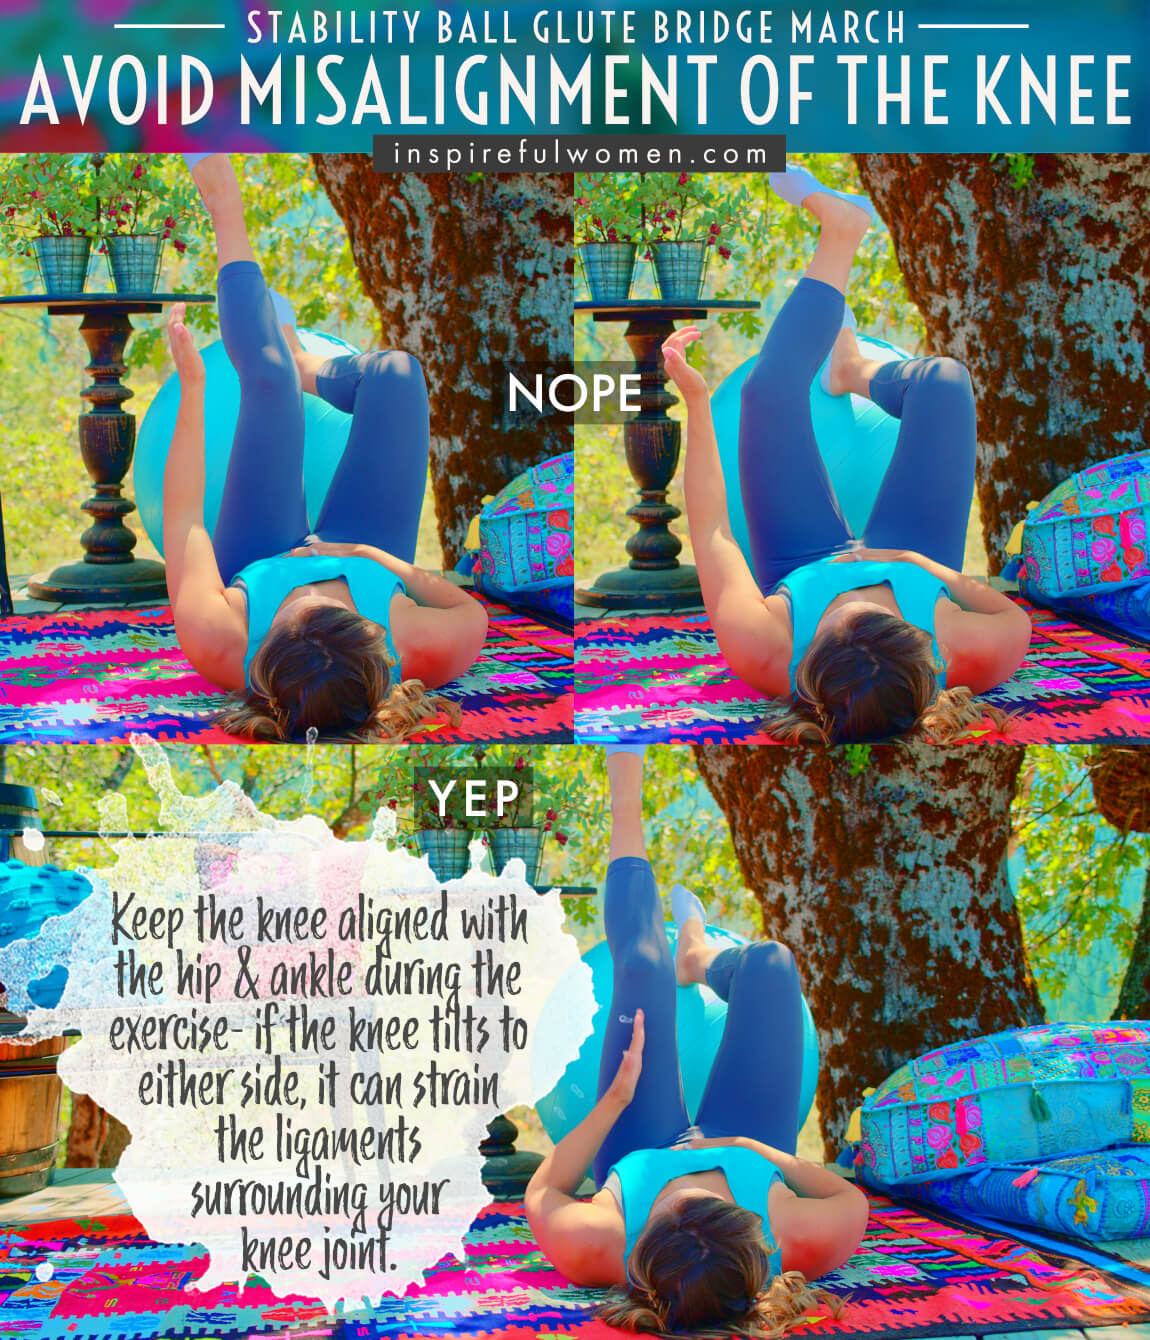 avoid-misalignment-of-the-knee-marching-stability-ball-glute-bridge-common-mistakes